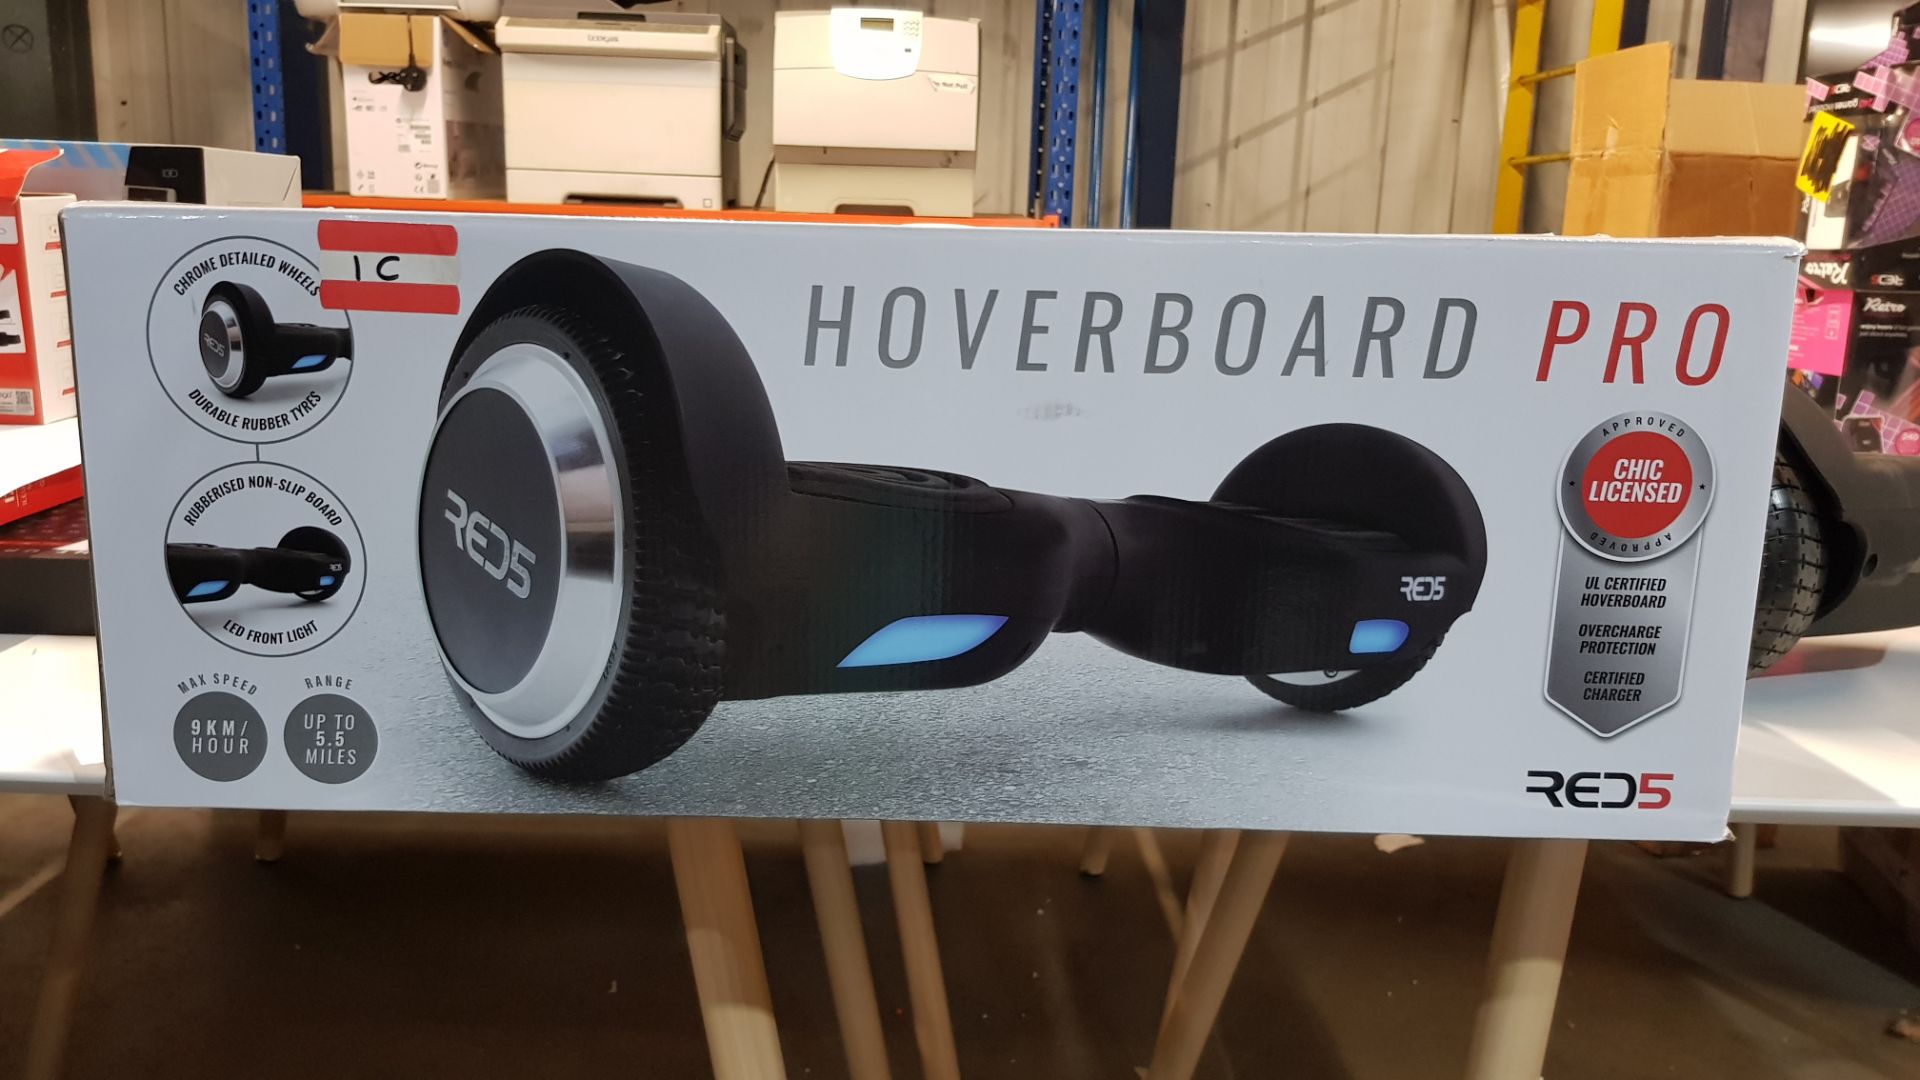 1 X RED 5 HOVERBOARD PRO (MAX SPEED 9KM PER HOUR, RANGE UP TO 5.